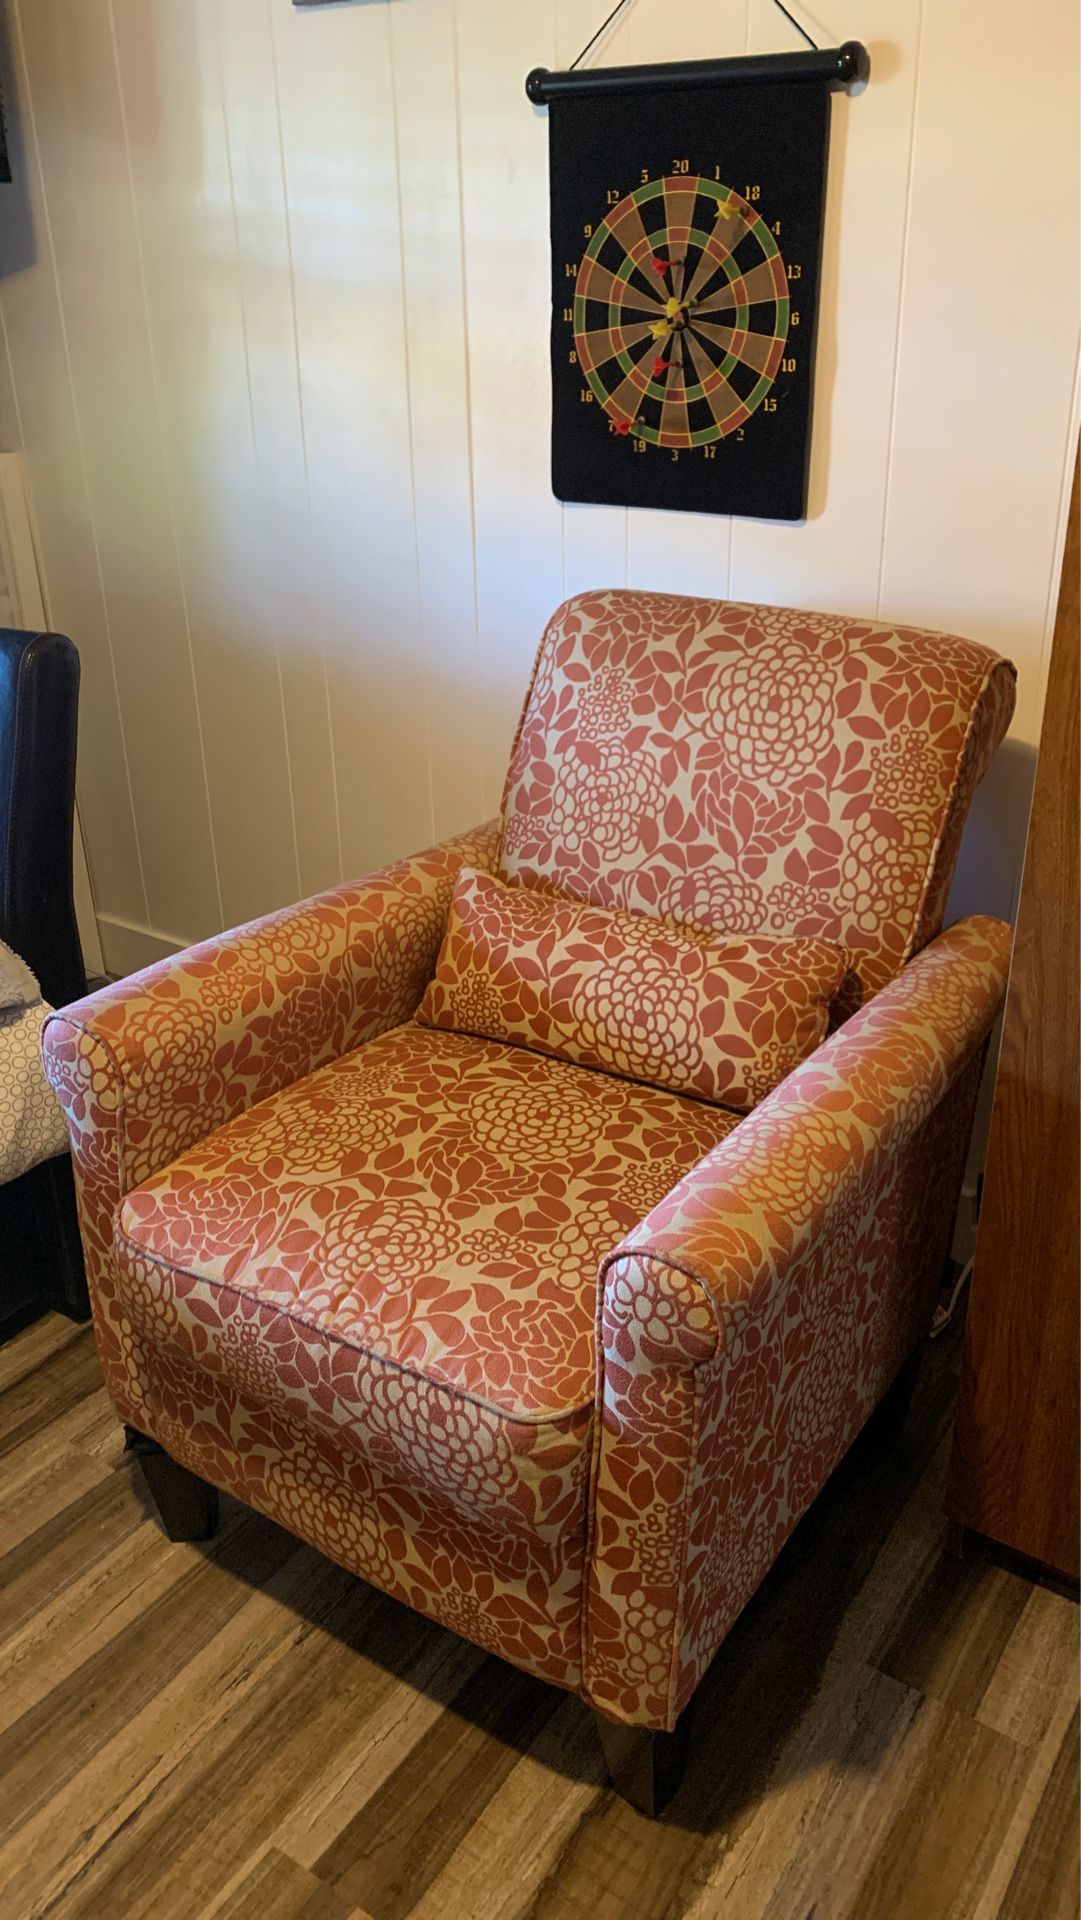 FLOWER PATTERN CHAIR - FOR SALE